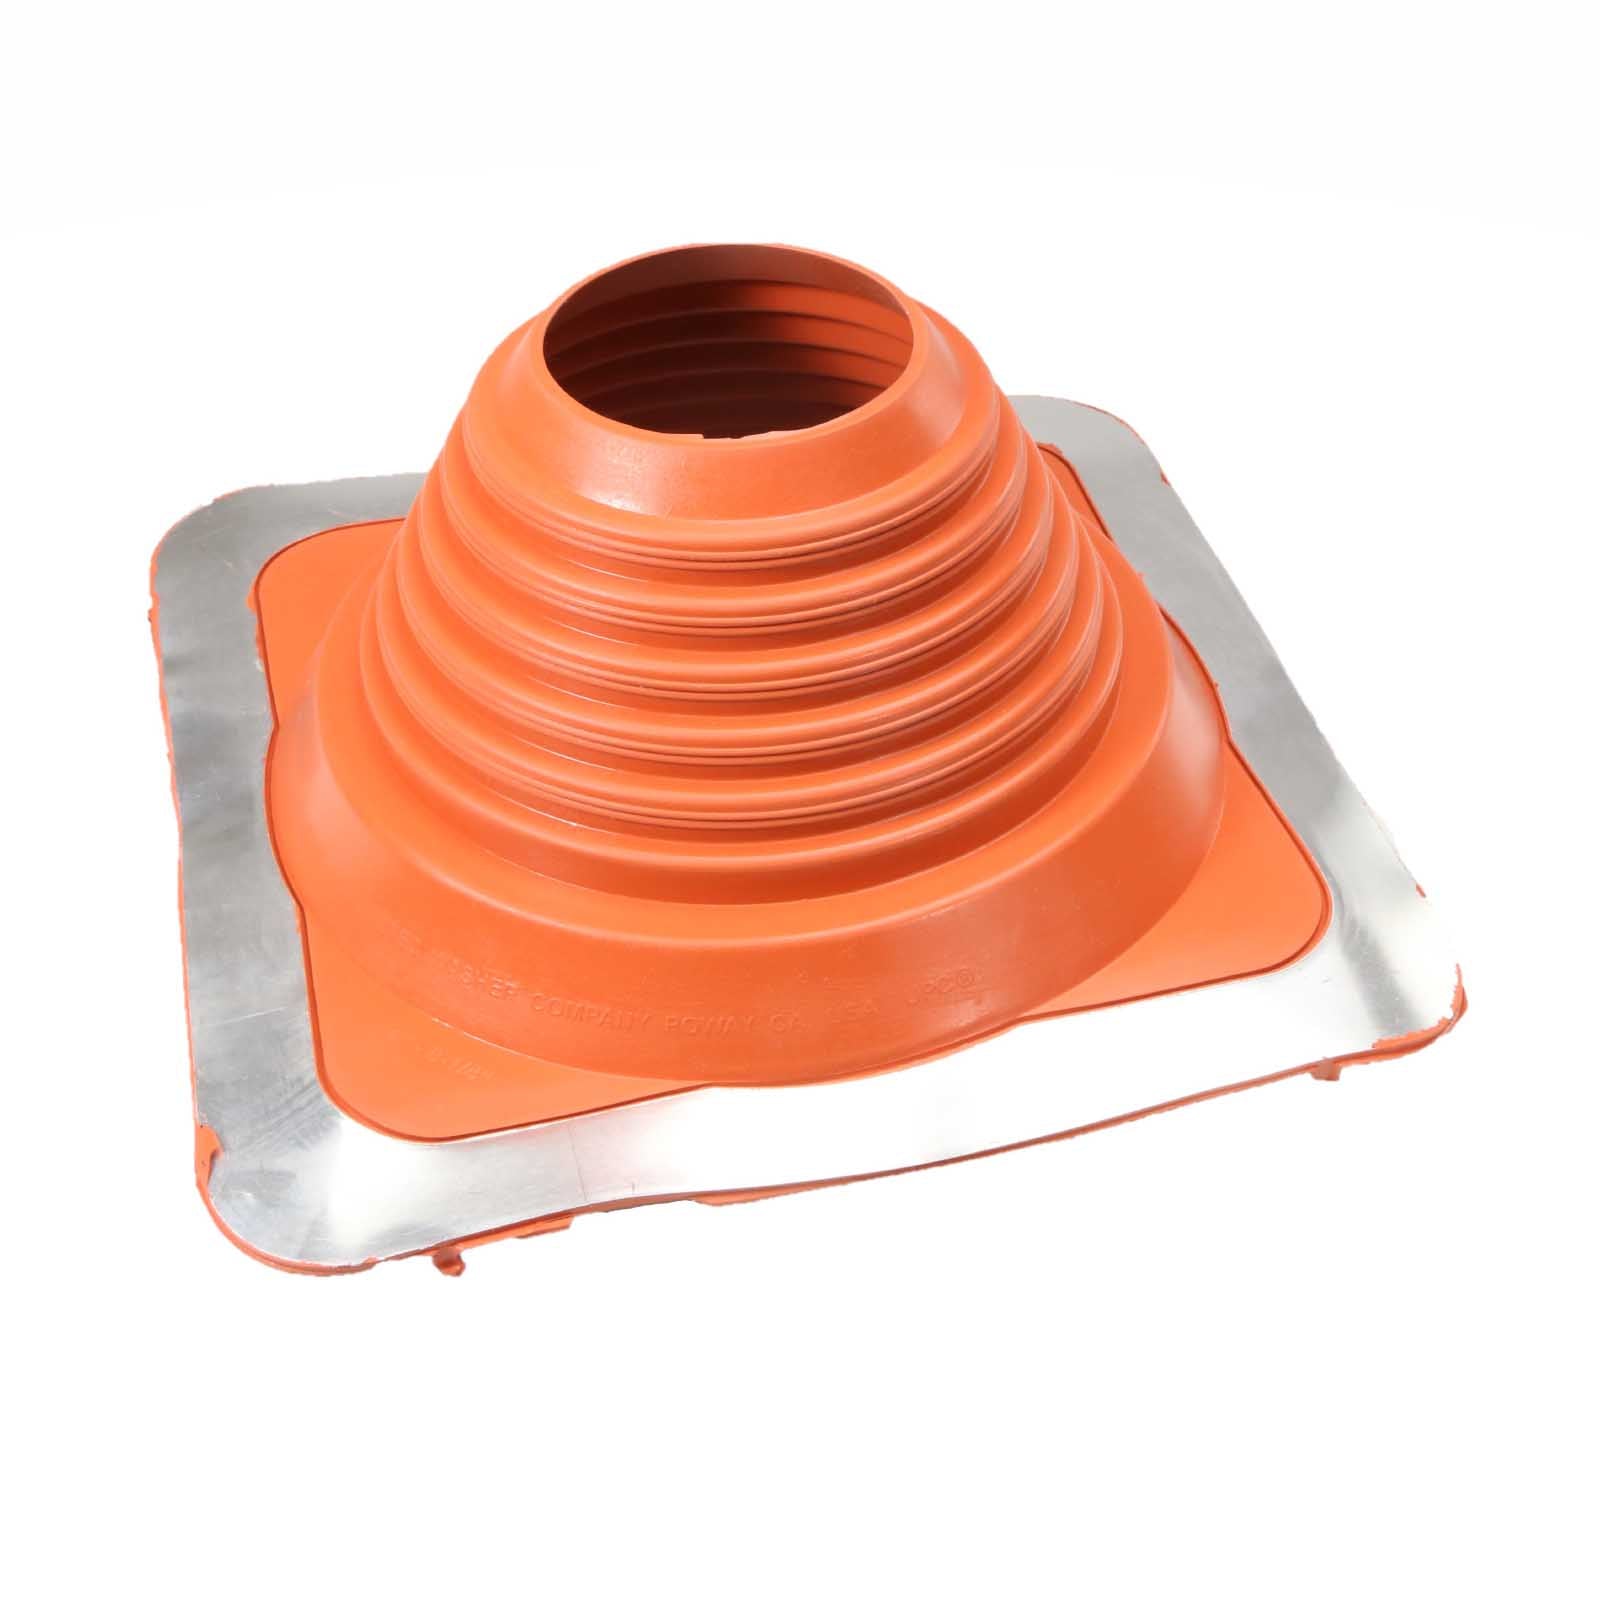 #5 Roofjack Square Silicone Pipe Flashing Boot Red